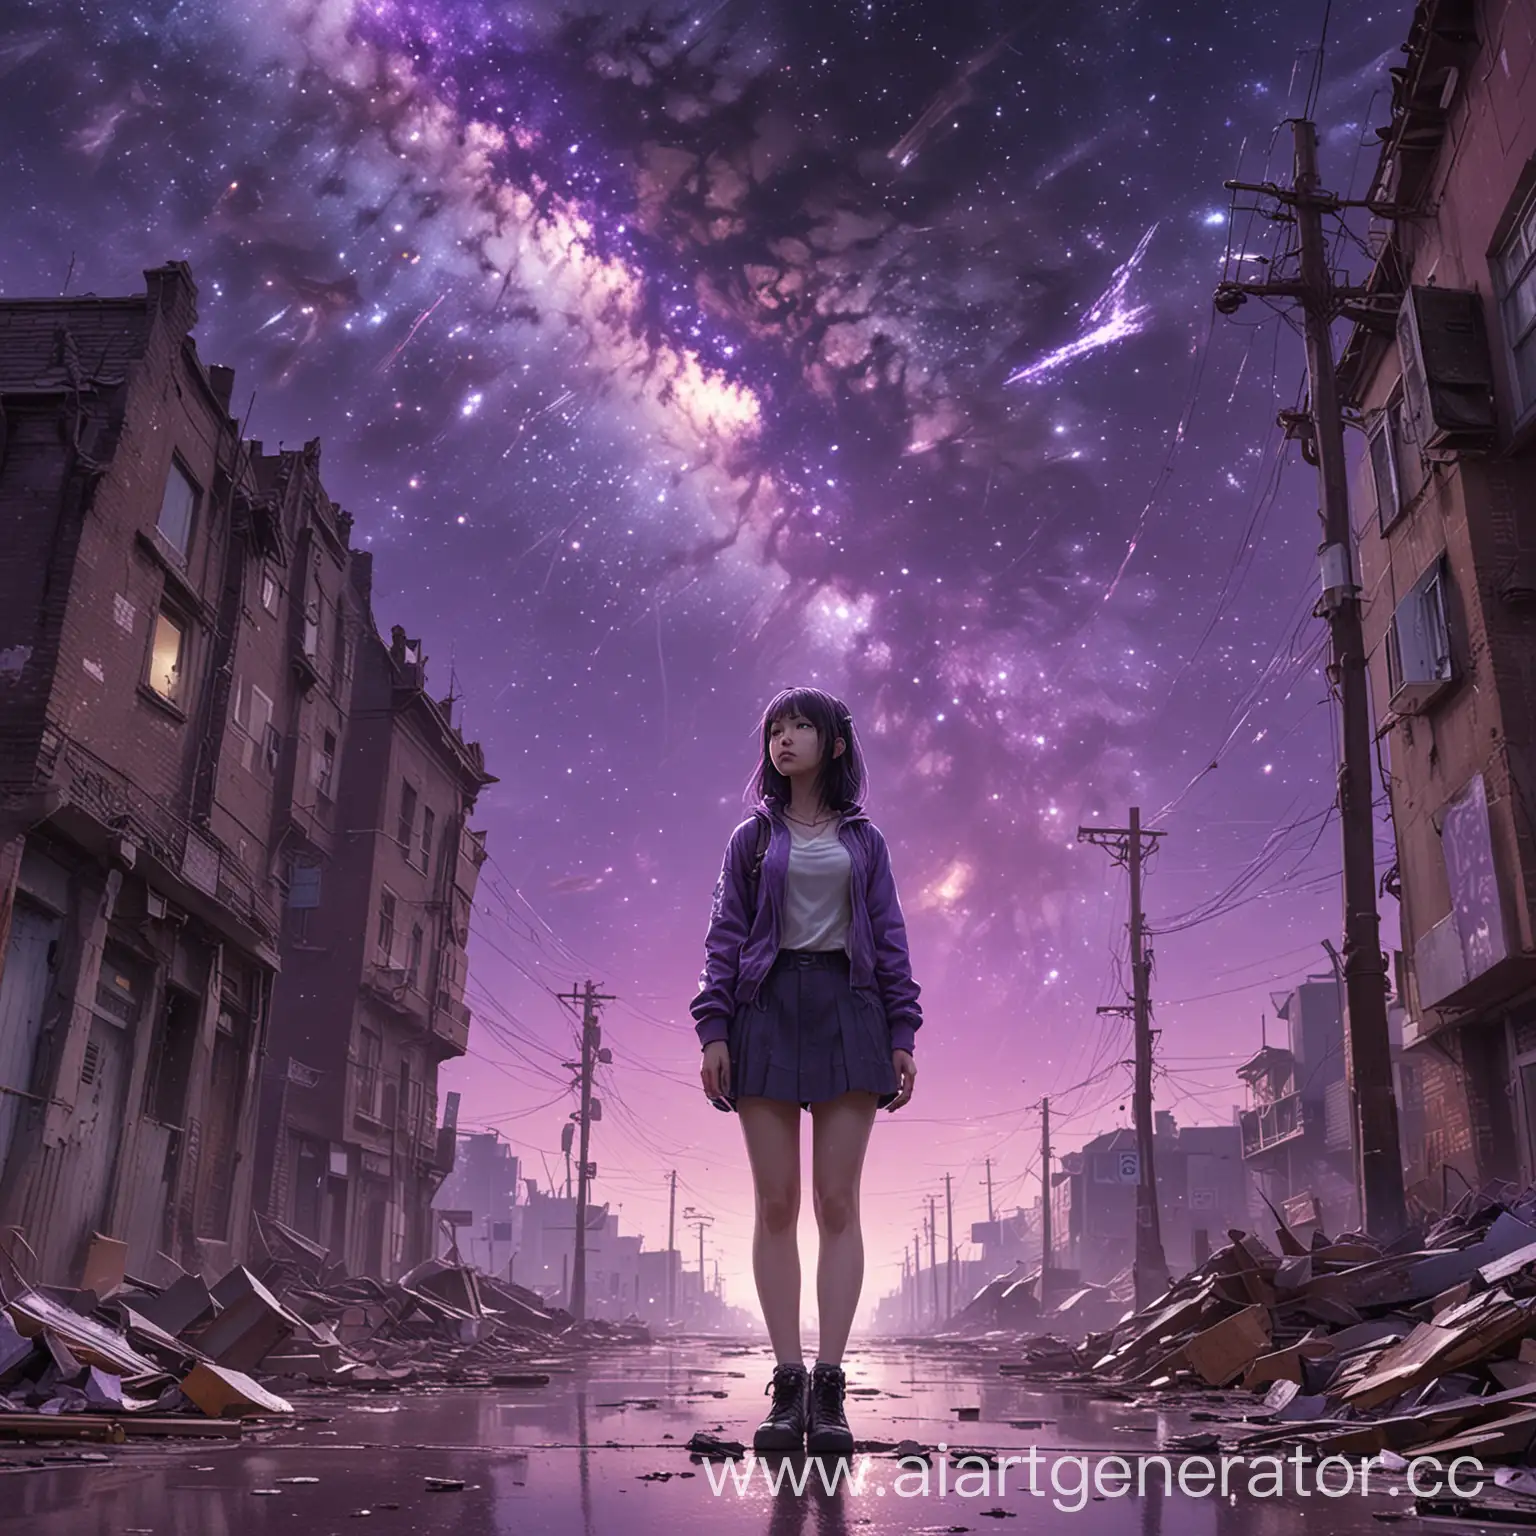 Anxious-Steward-in-Guweiz-Style-Amidst-Wrecked-Technology-and-the-Milky-Way-Sky